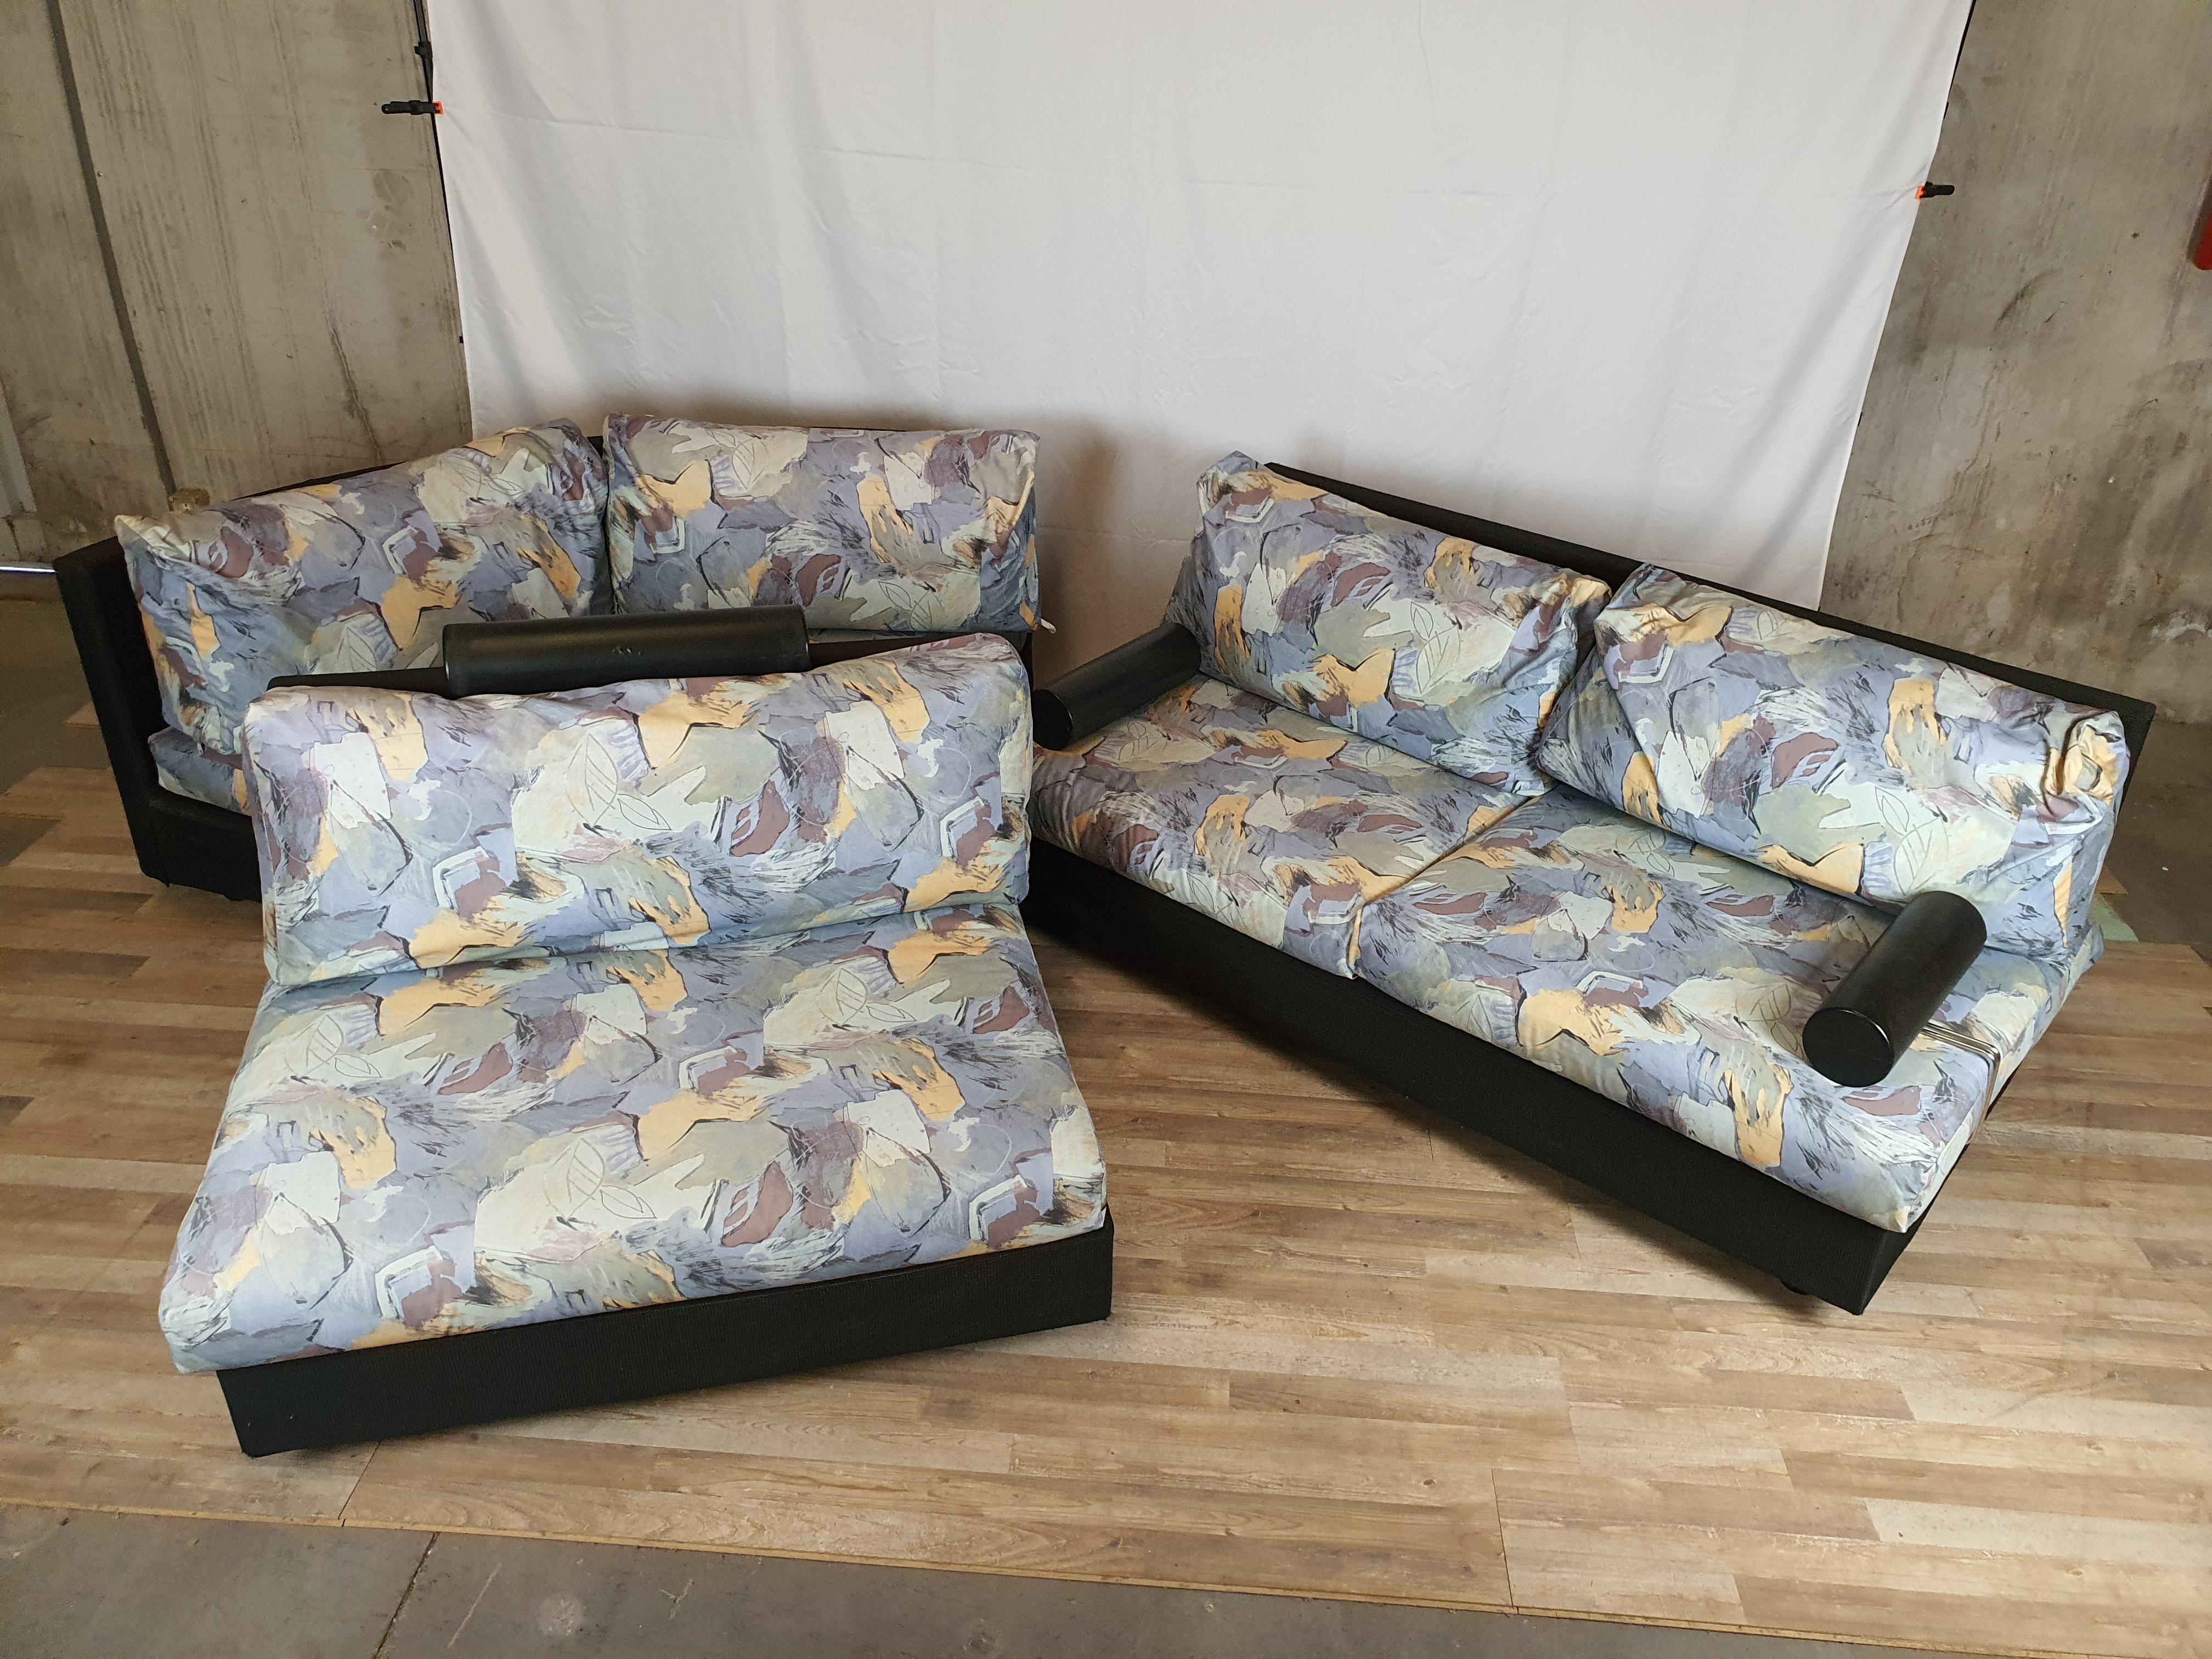 Elegant 70s/80s sofa of Italian production with removable cushions, headrest and armrests.

It consists of three pieces, a single seat, a corner seat and a double section.

All the cushions have removable covers and the two armrests, as well as